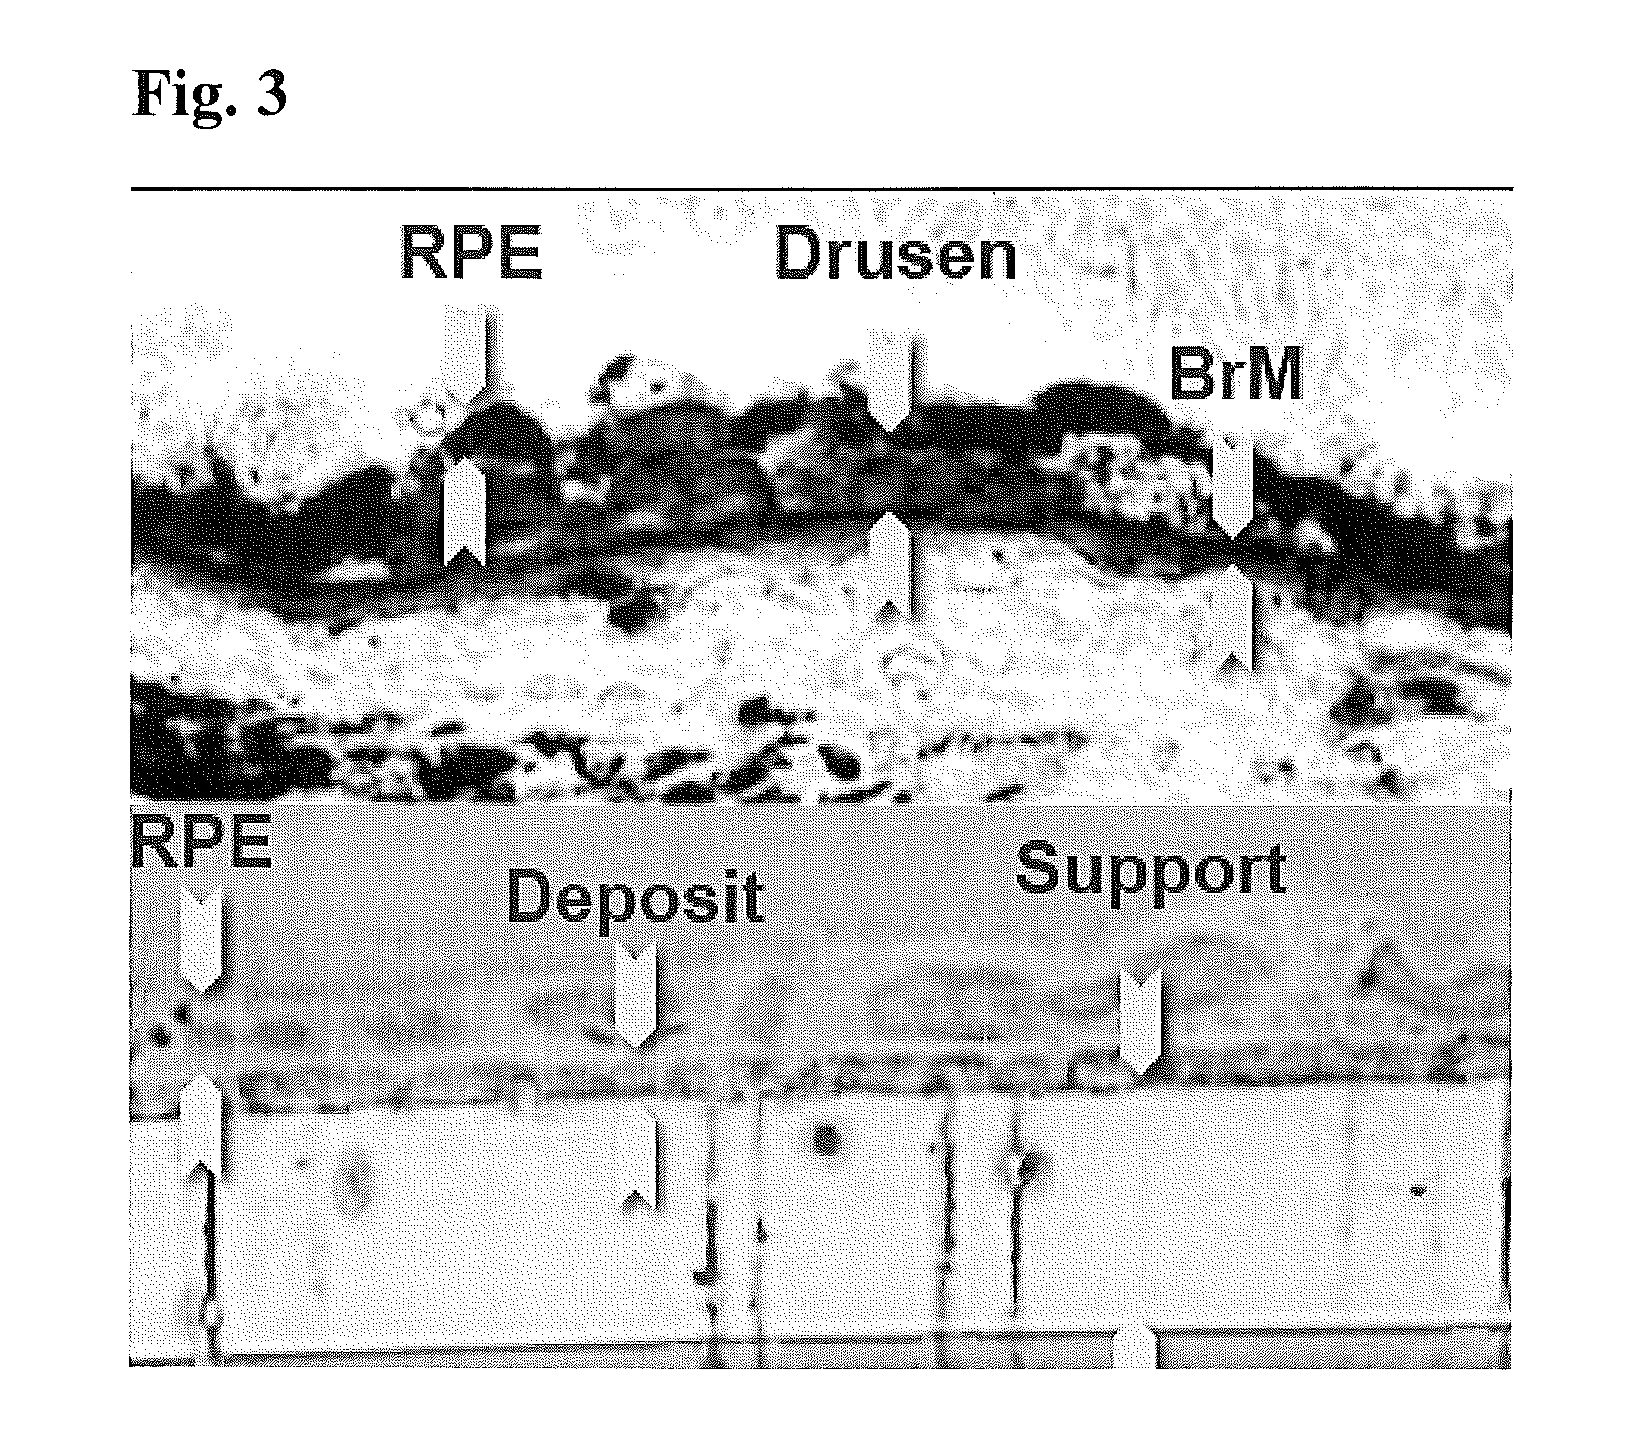 Retinal pigment epithelial primary cell culture system producing subcellular deposits